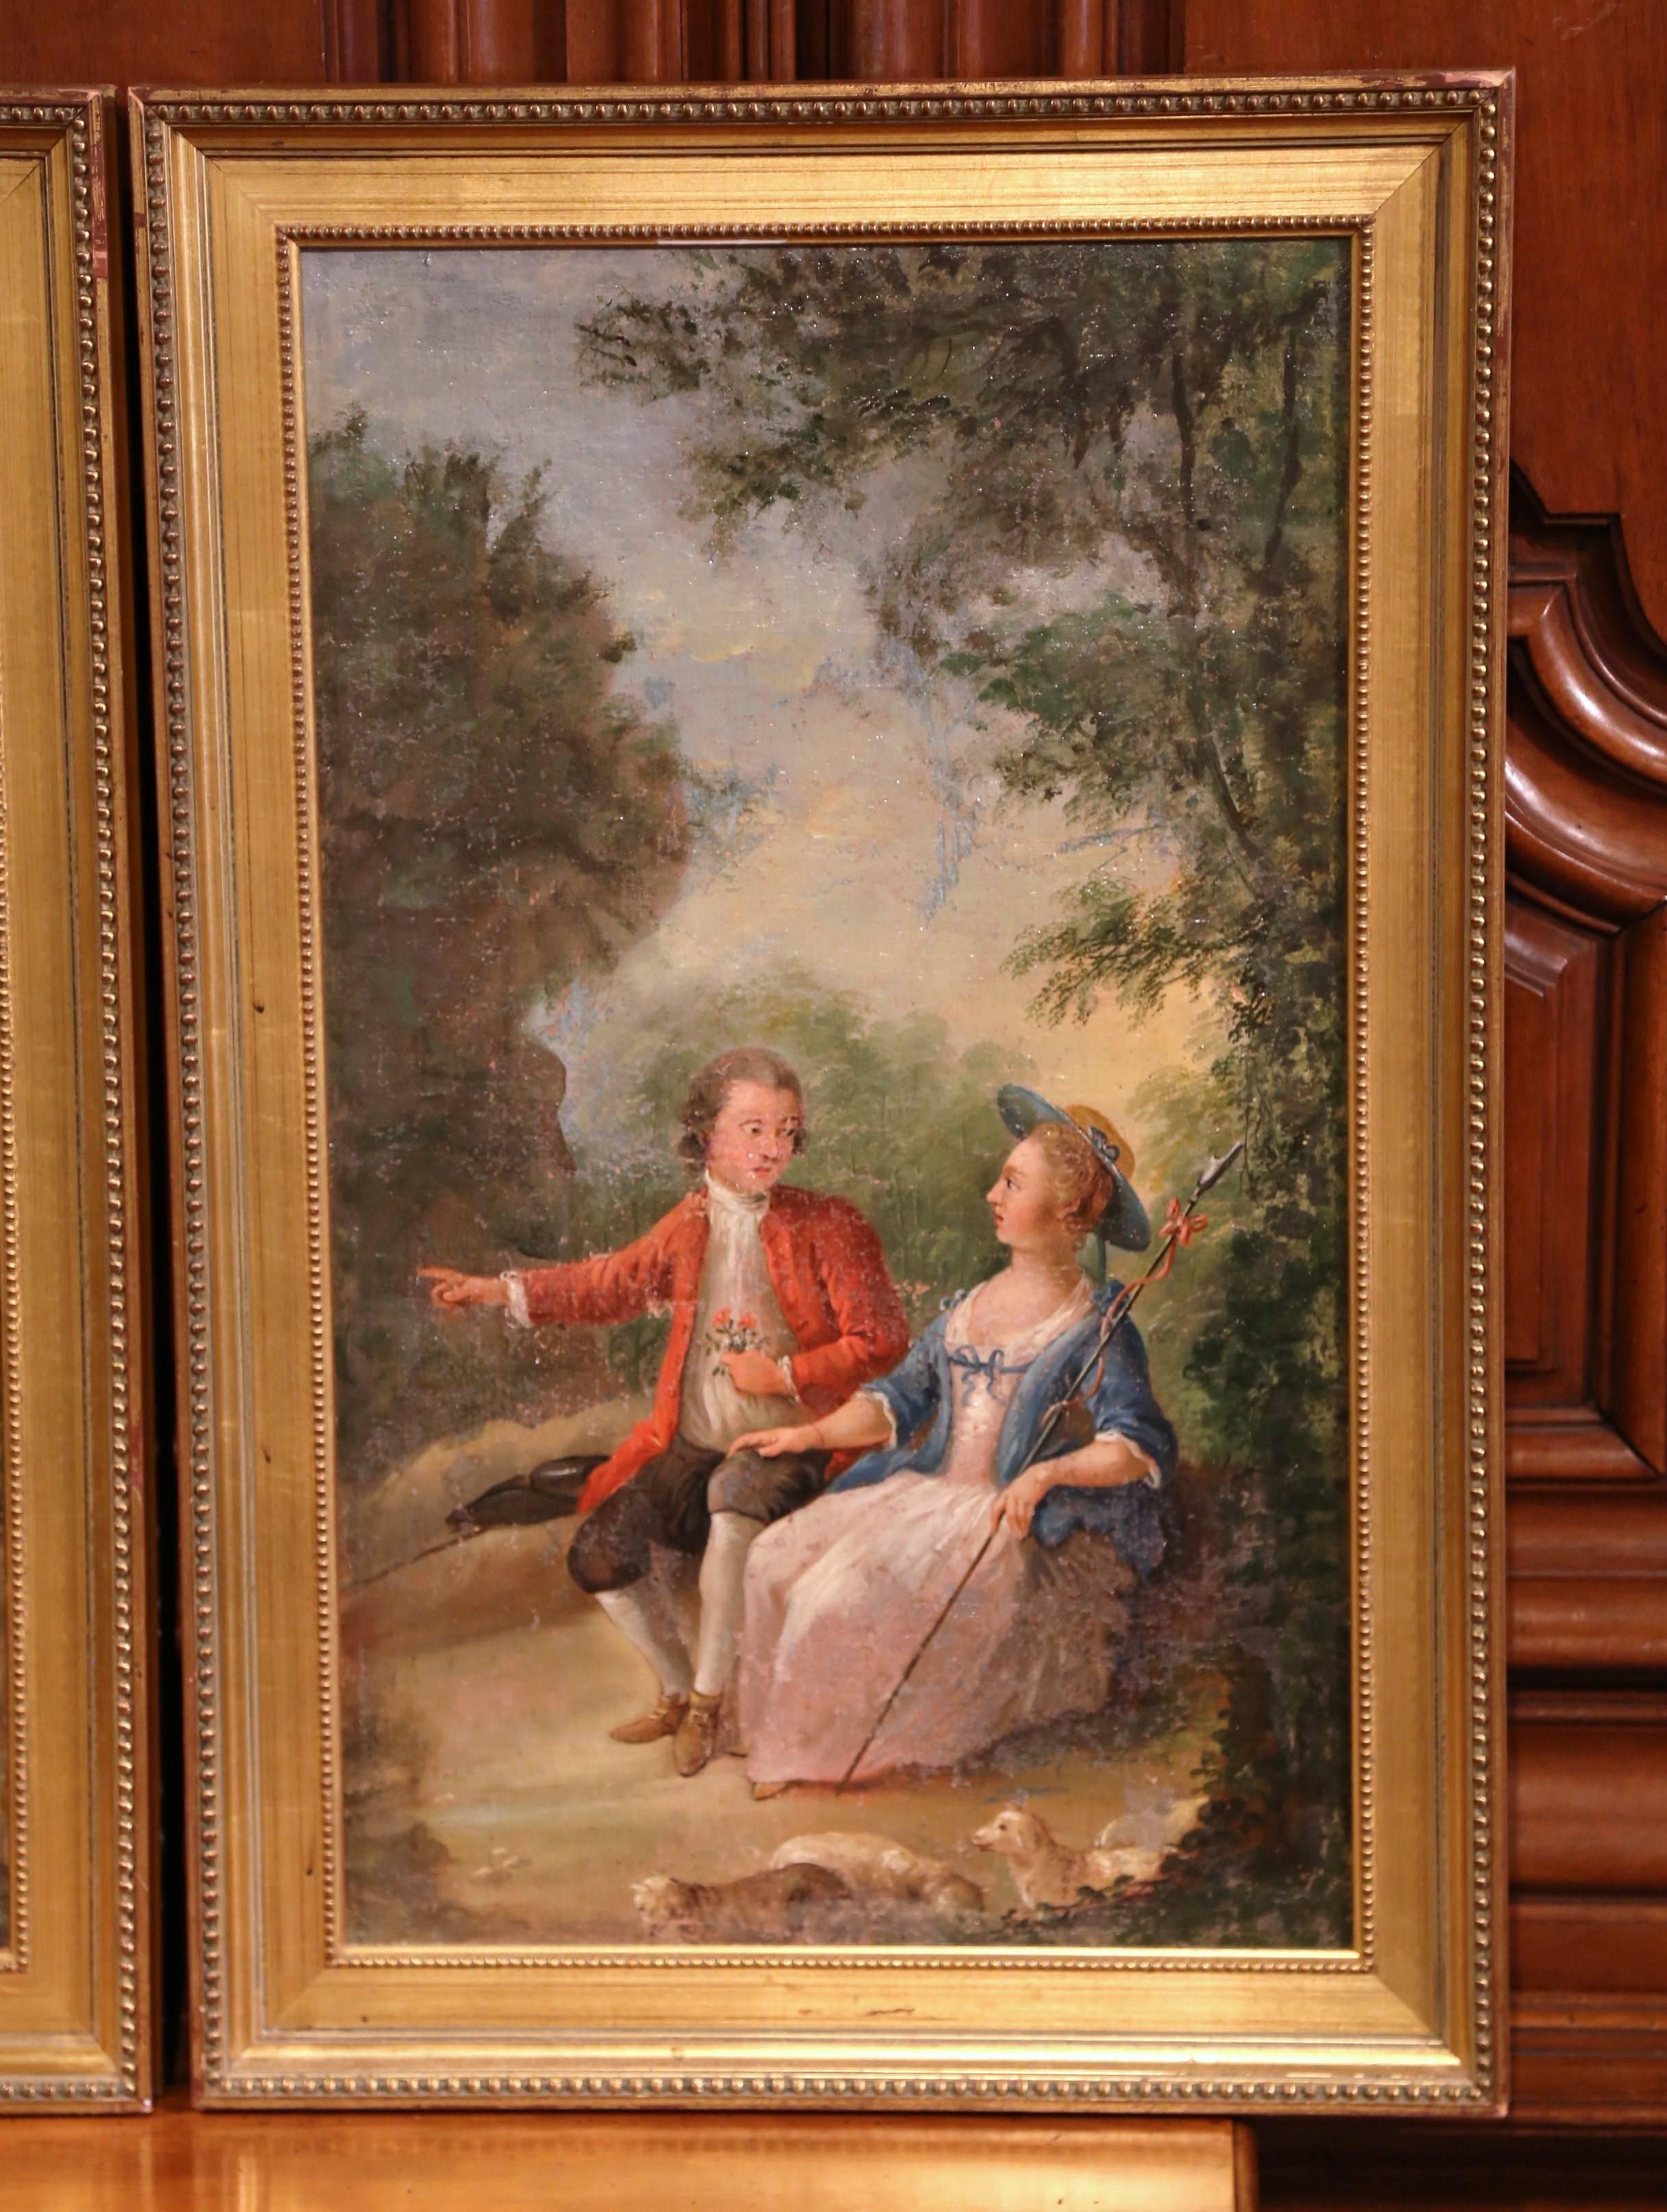 This beautiful pair of antique paintings were crafted in France circa 1780. The courtly, pastoral scenes take place in the fields and illustrate two different courting scenes. Dressed in elegant Louis XV costumes, the figures in each painting are